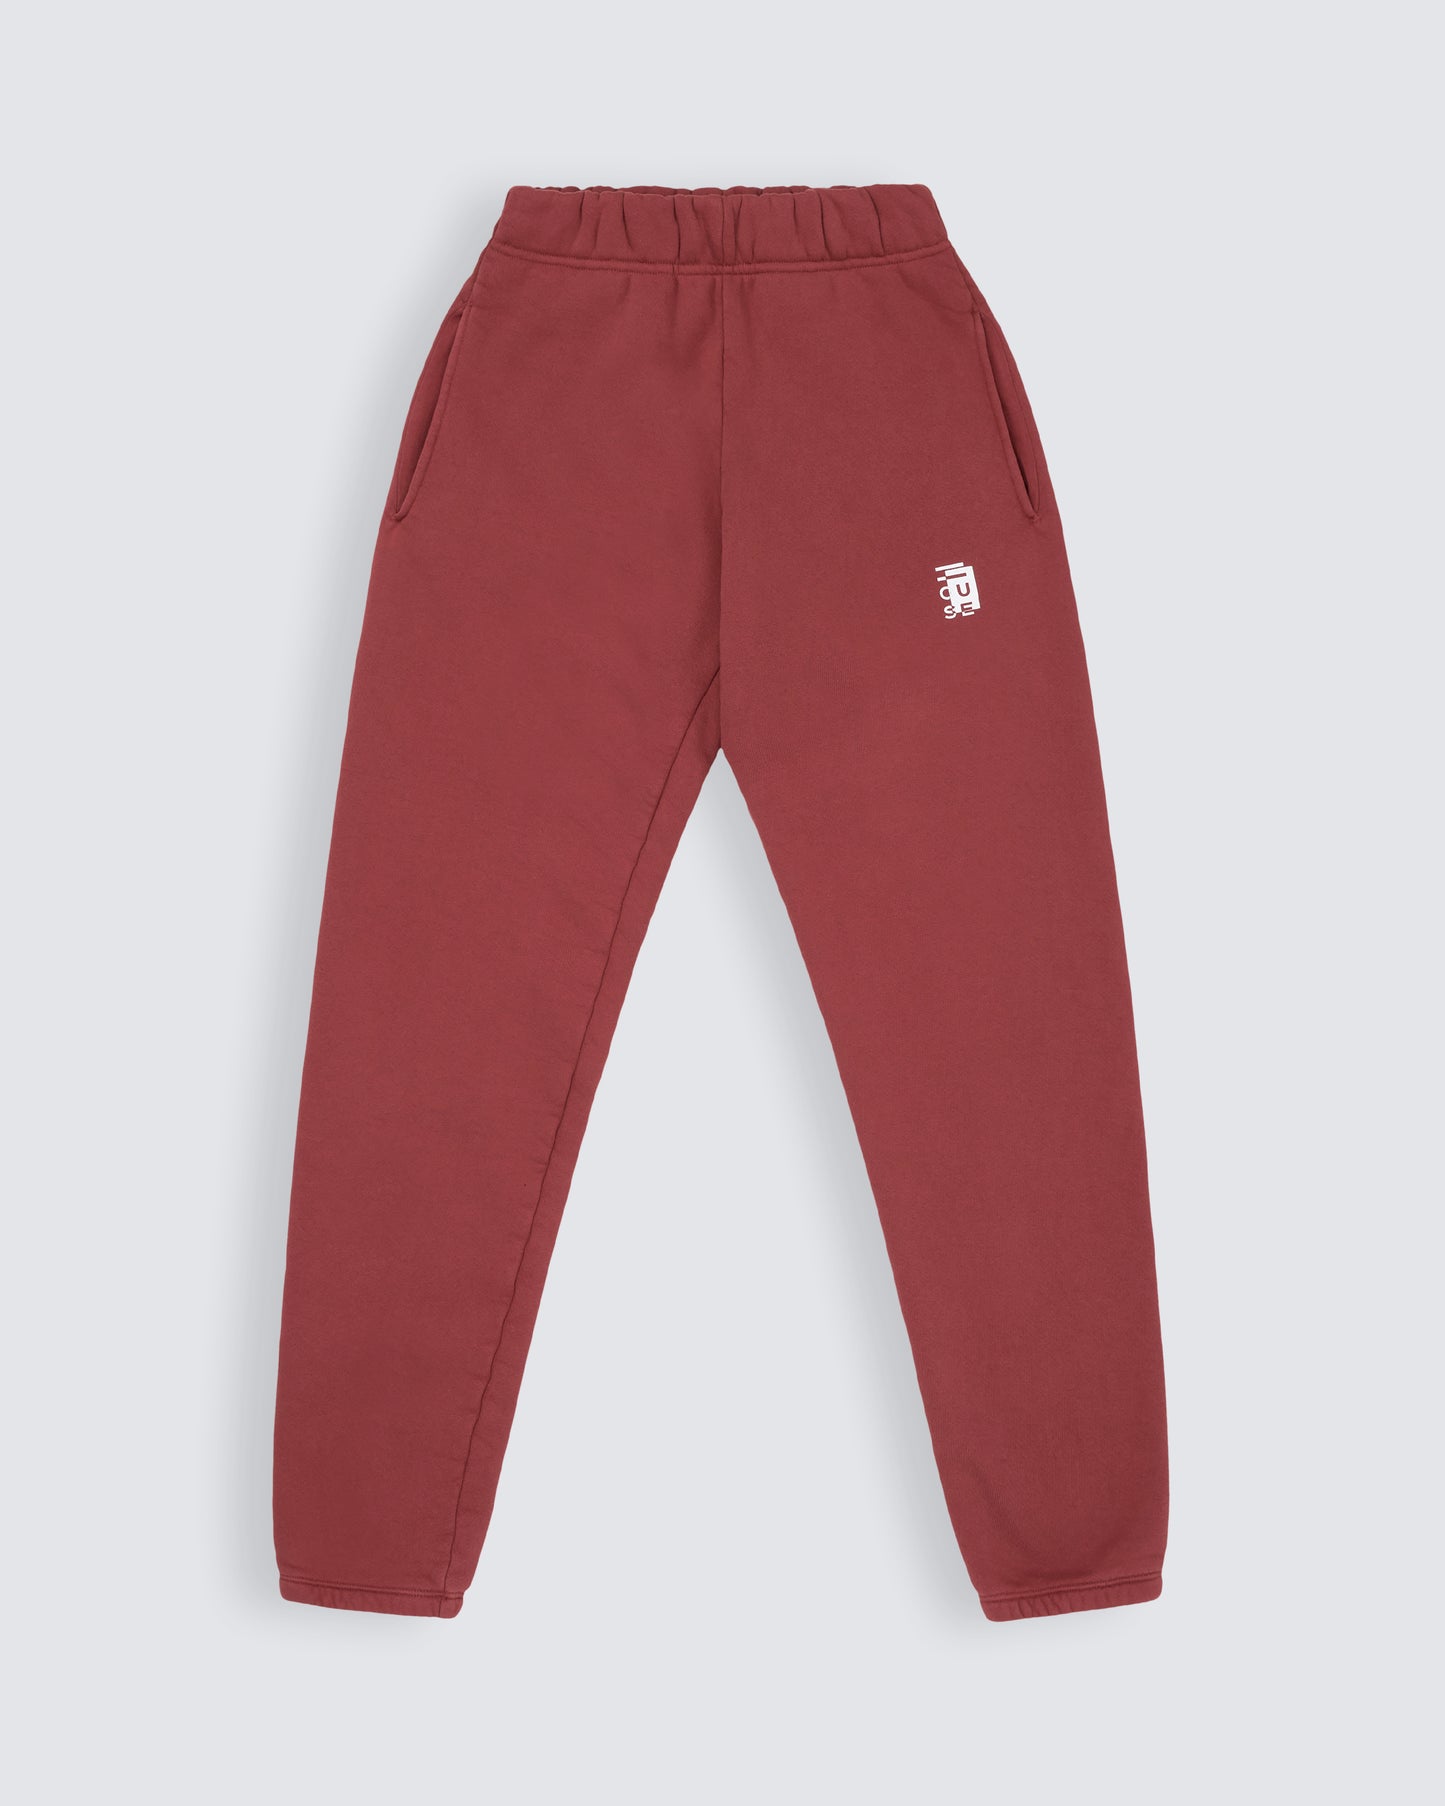 Sweat pants in Mars Red